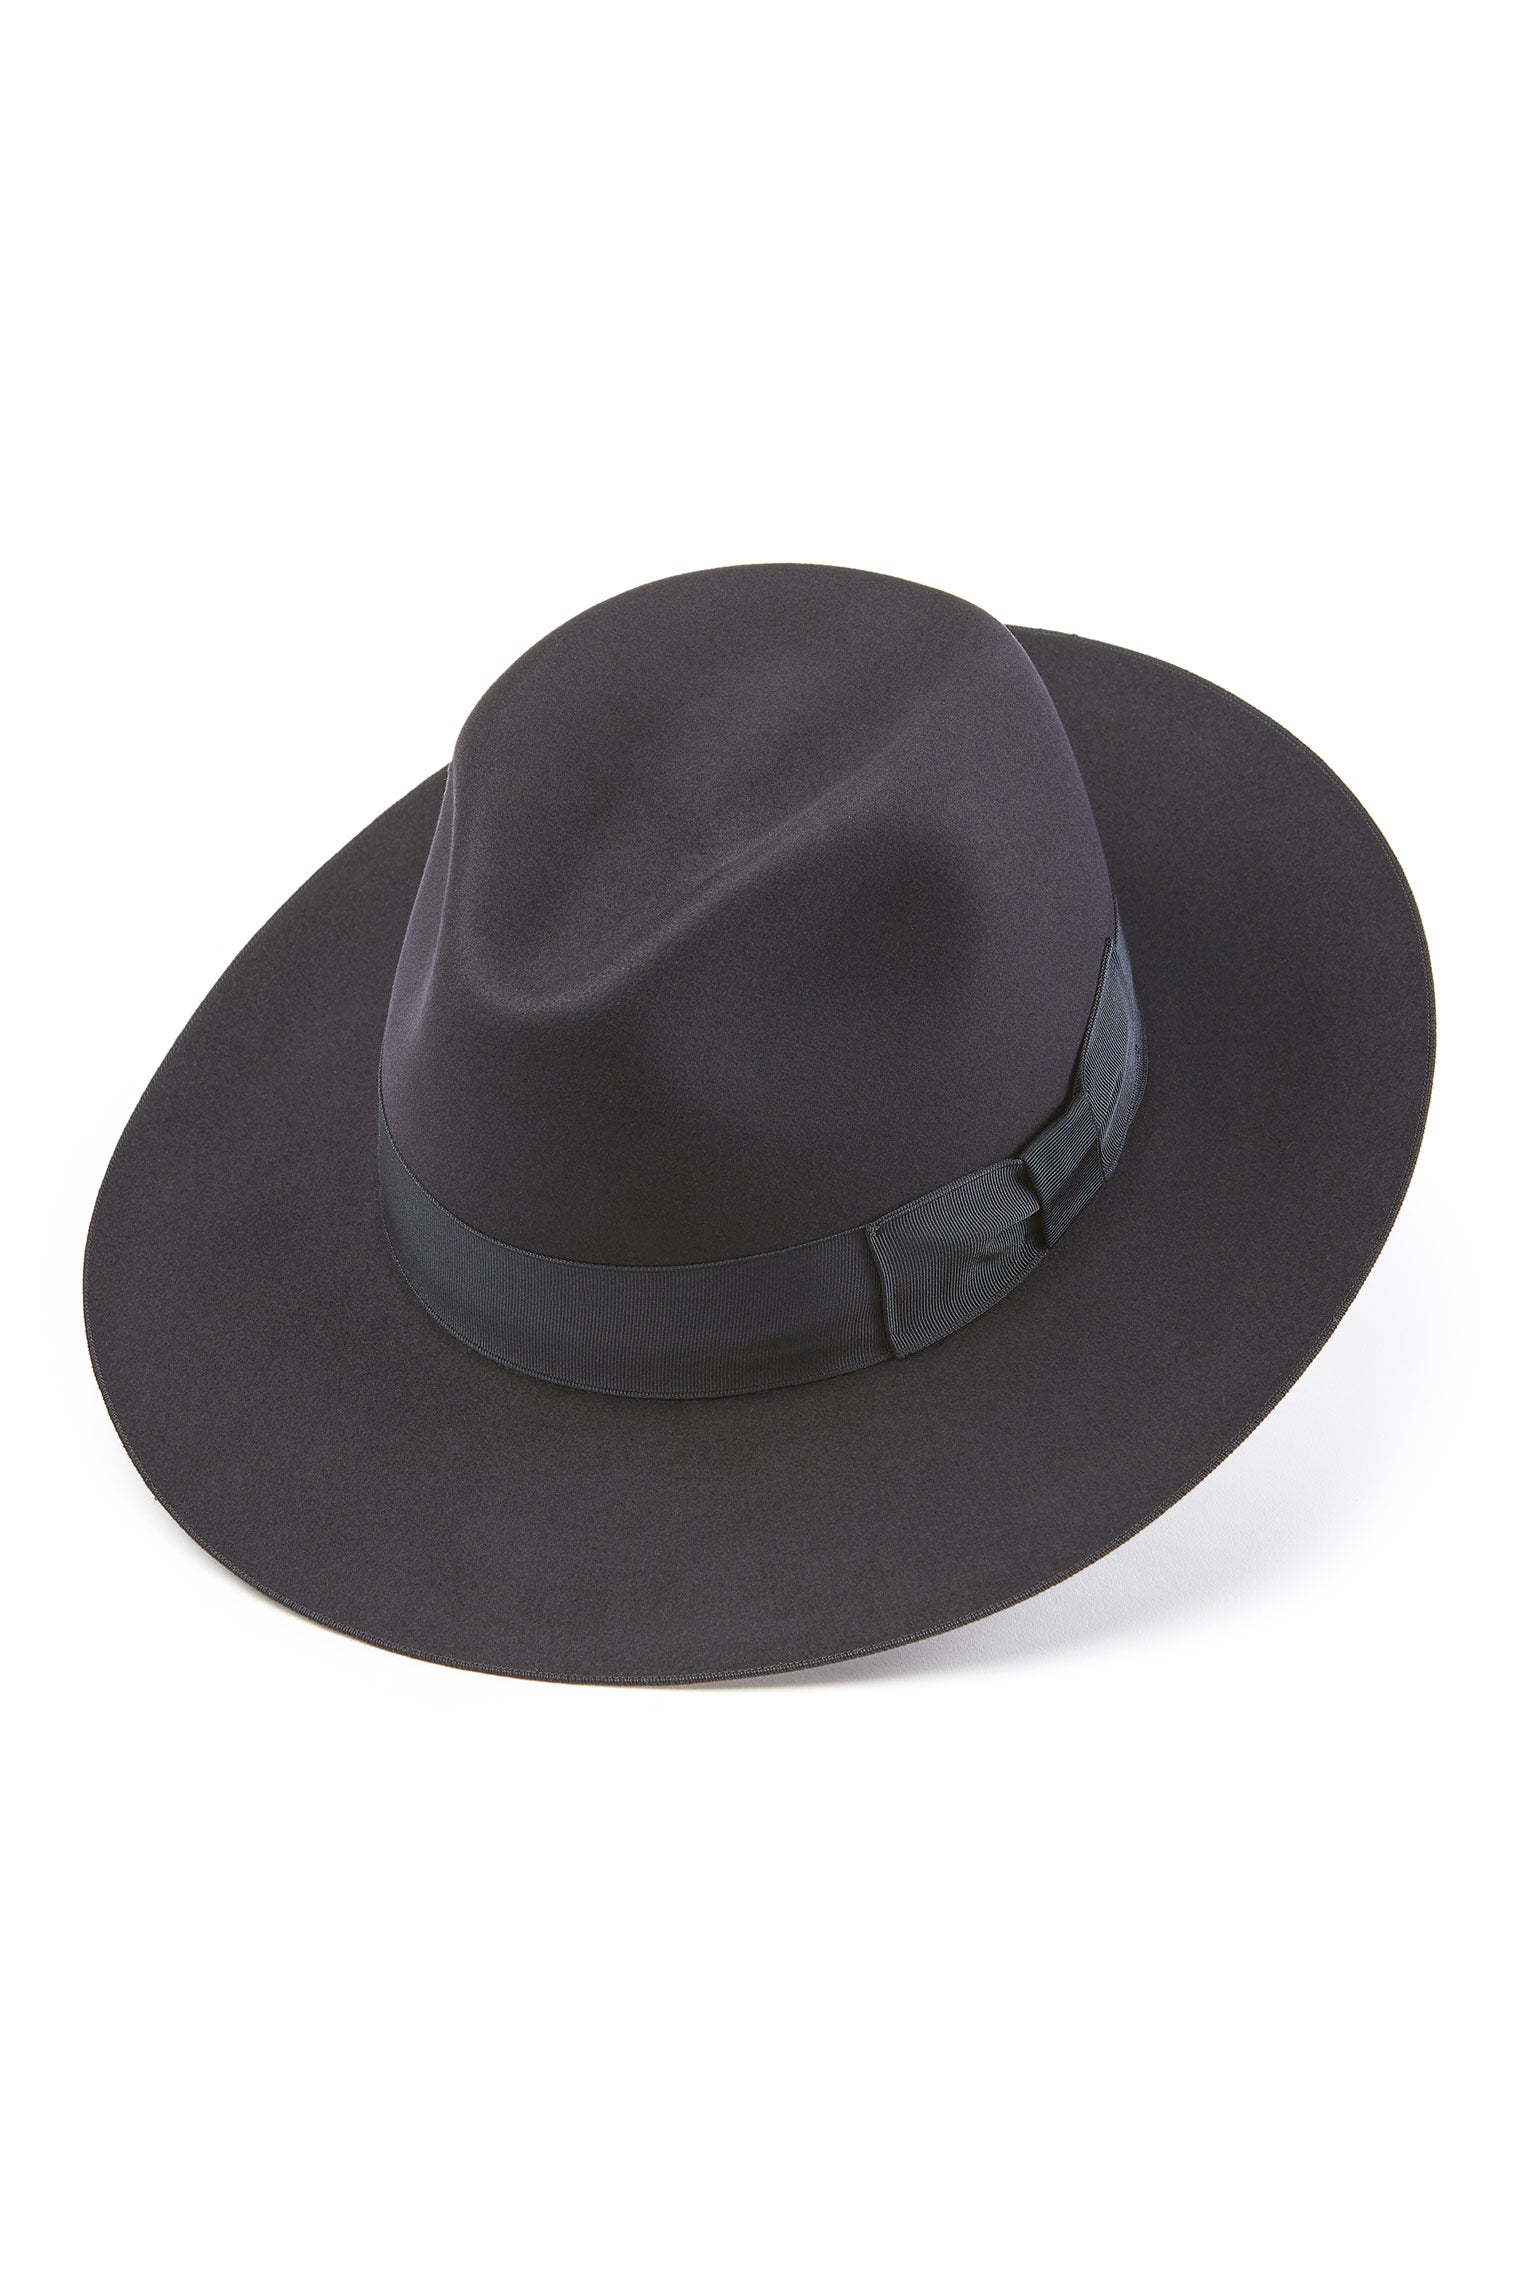 Dreadnought Fedora - Products - Lock & Co. Hatters London UK